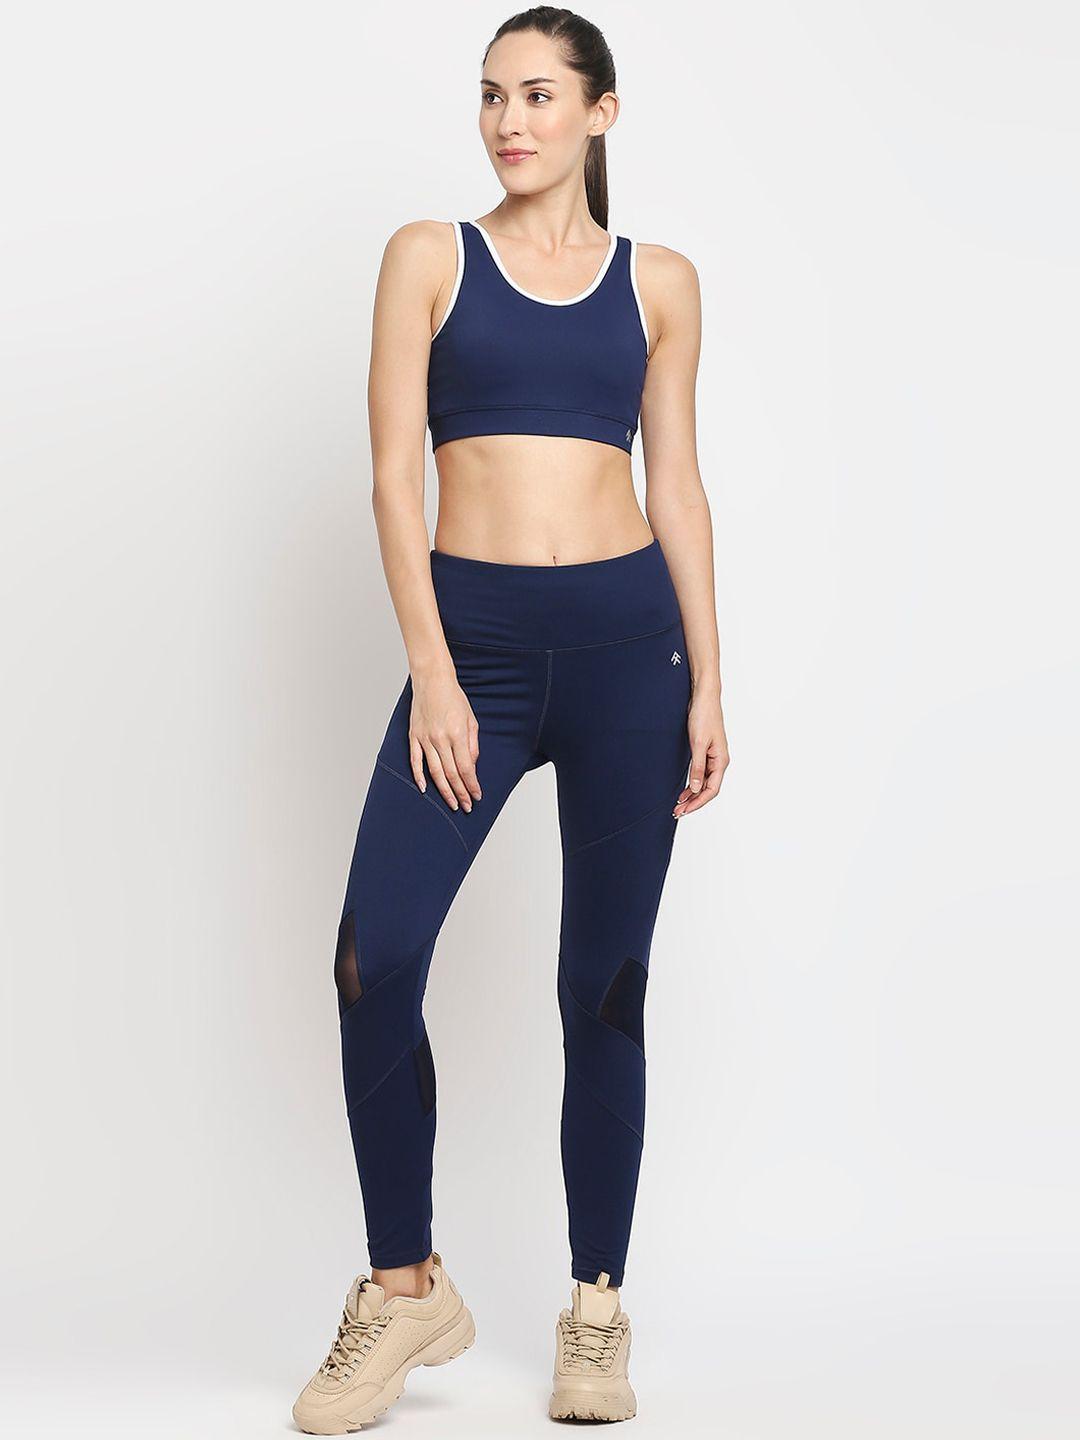 tuna london women blue patched sports bra with high compression tights